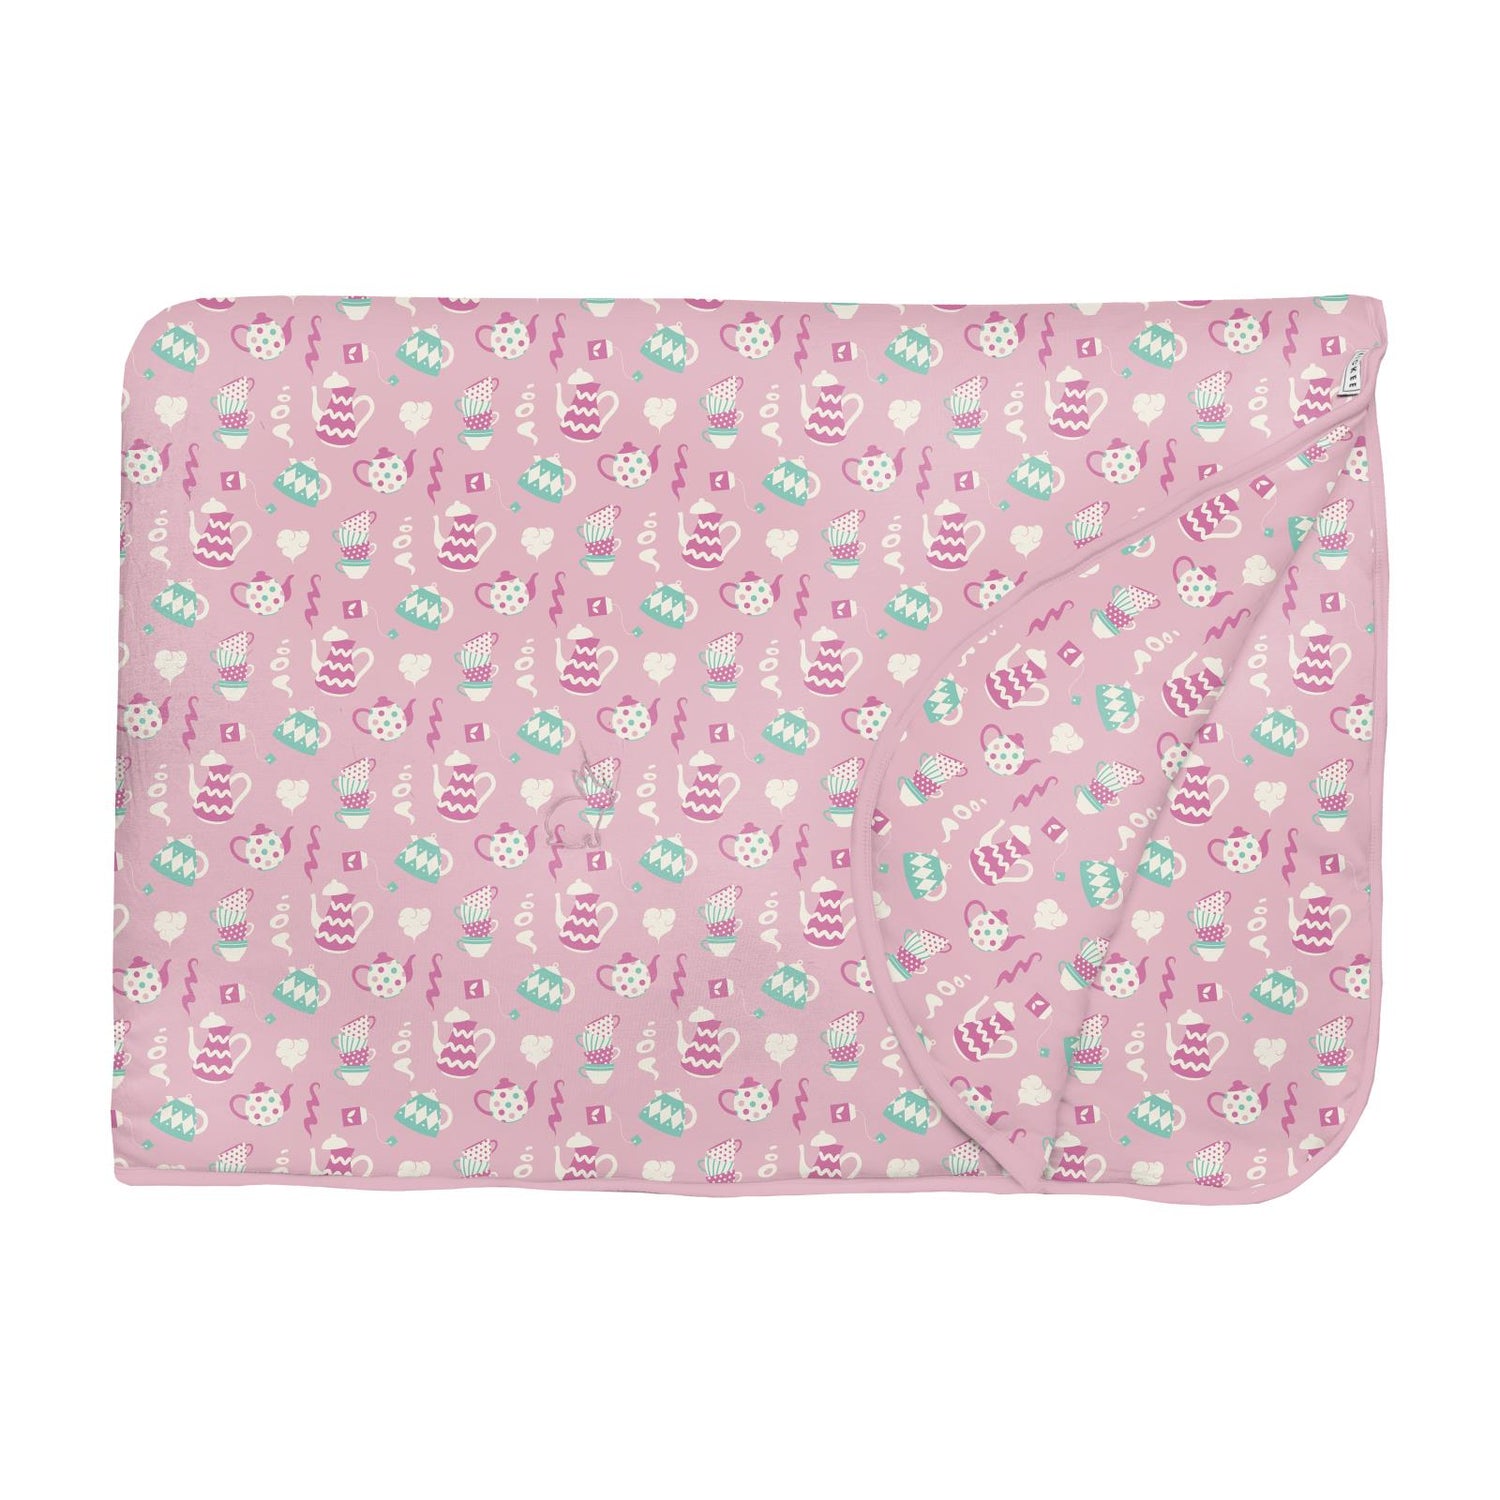 Print Fluffle Throw Blanket with Embroidery in Cake Pop Tea Party